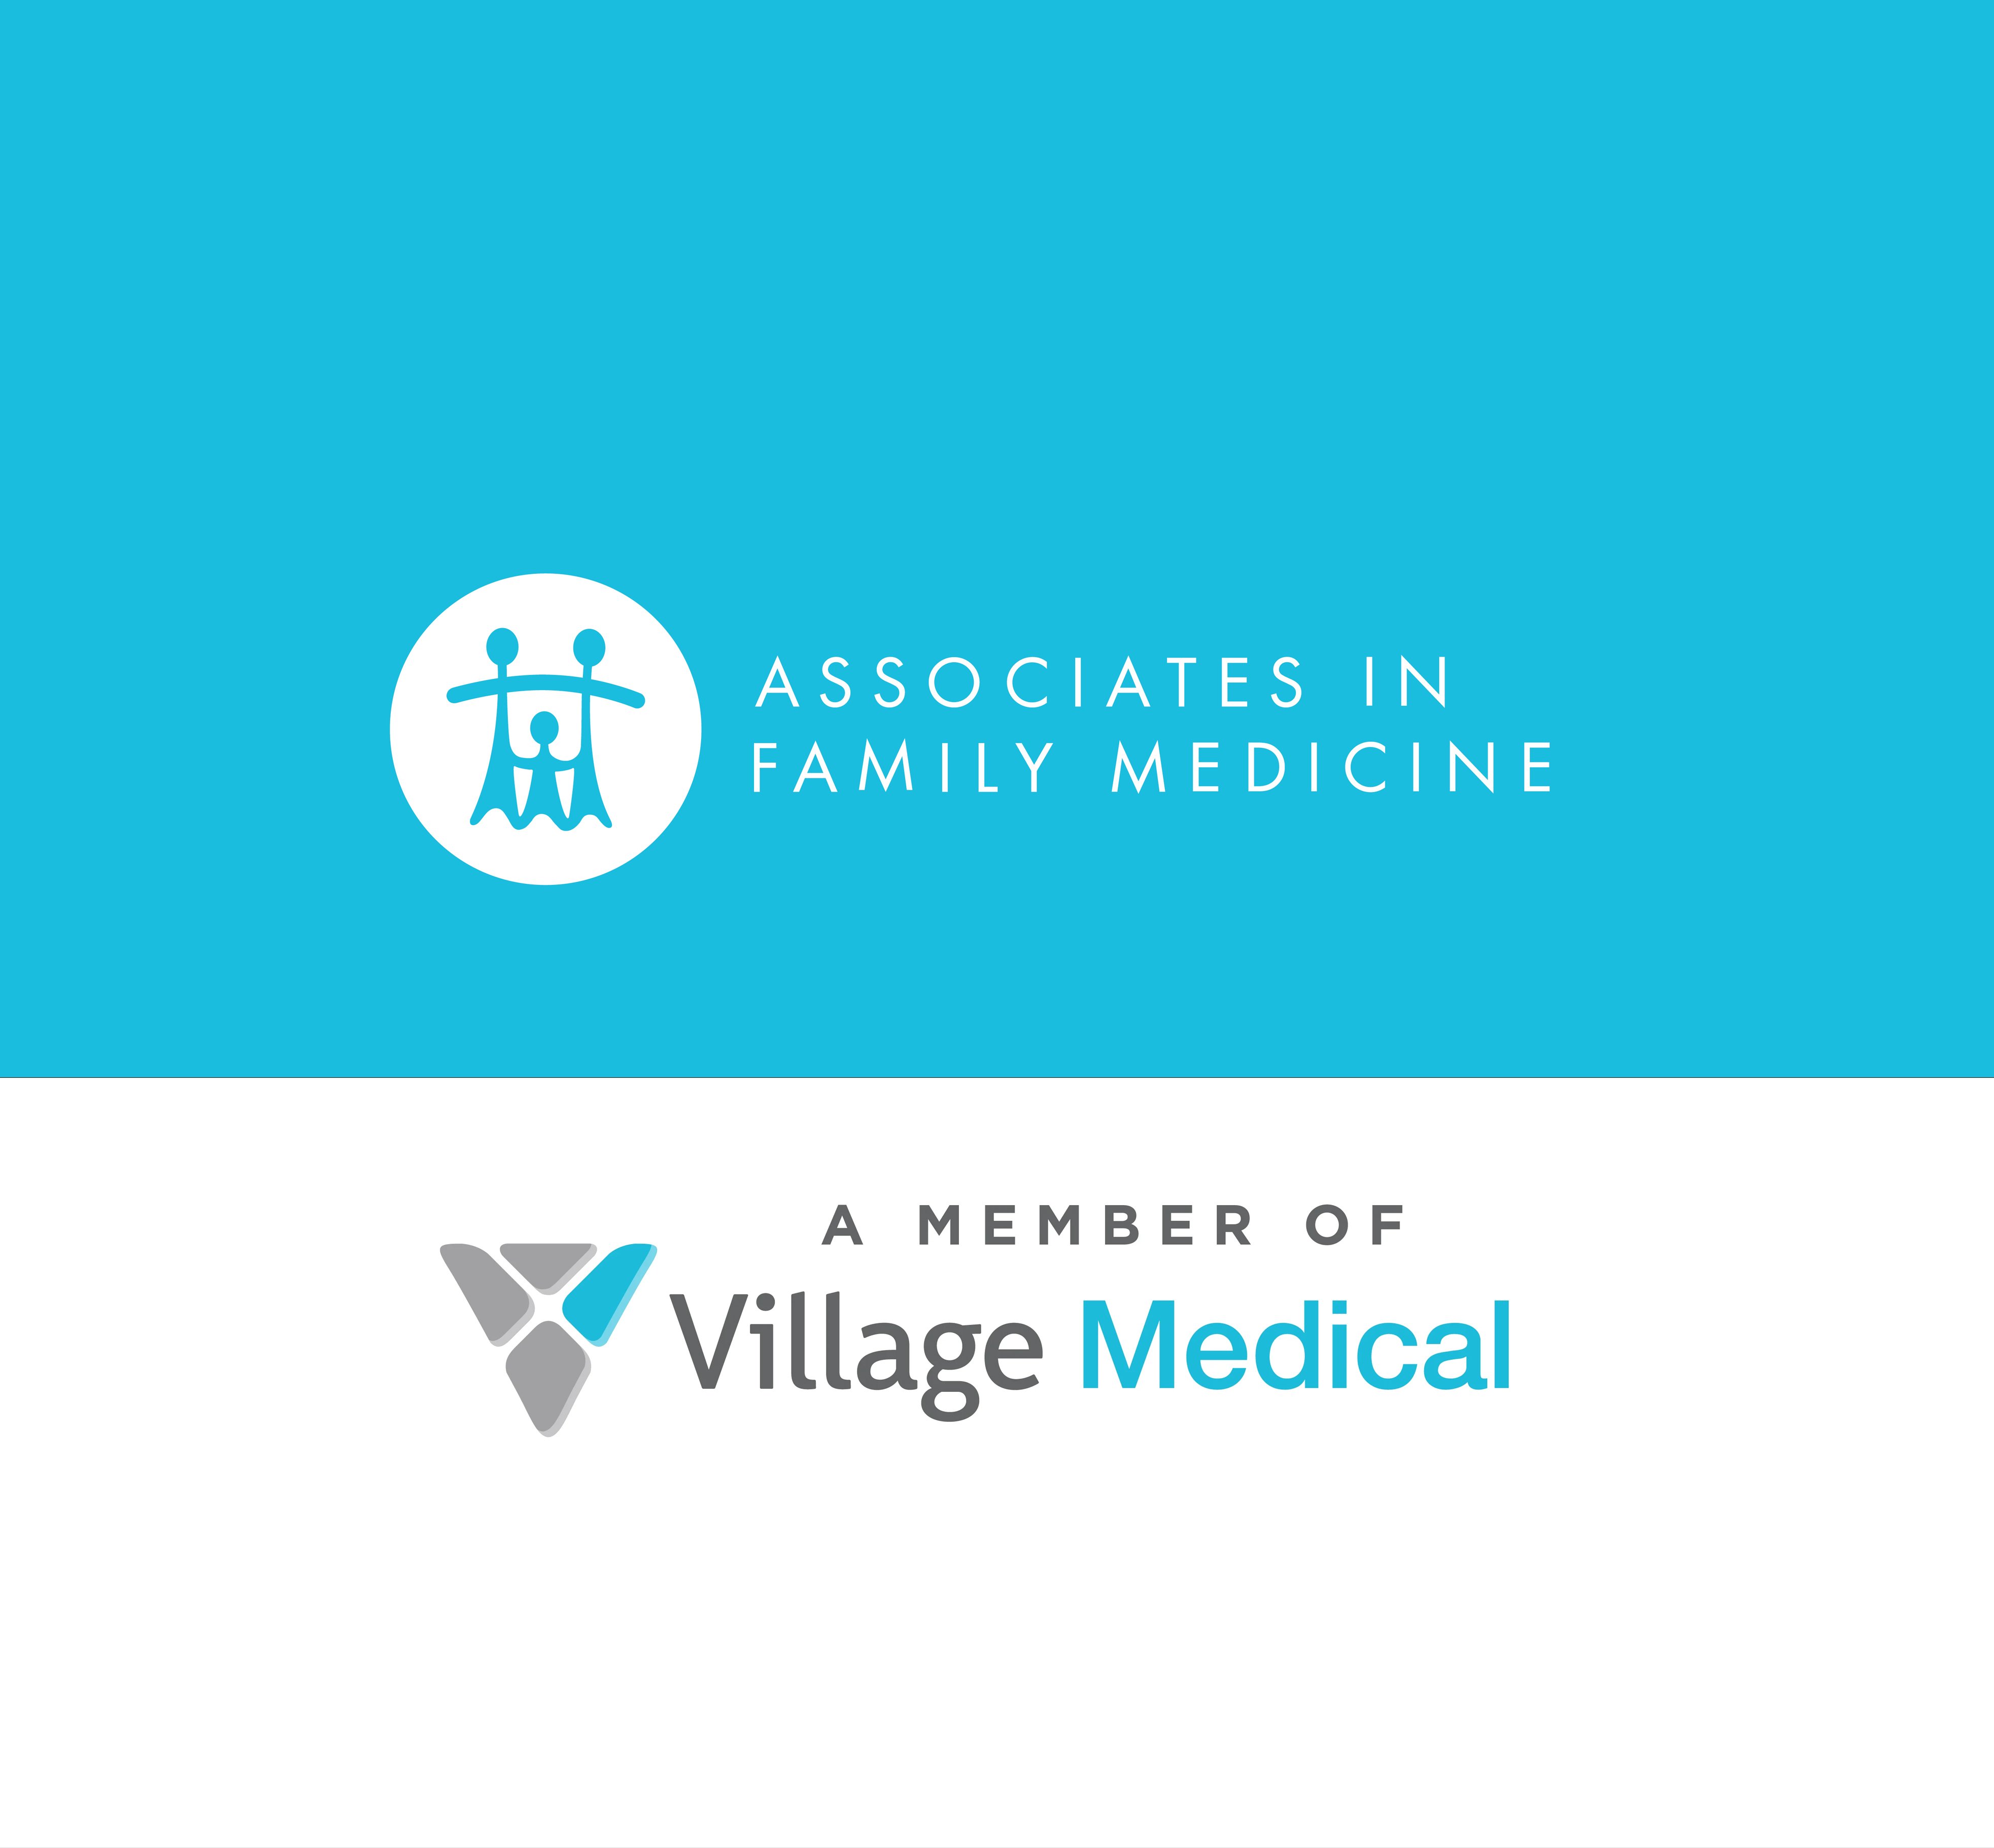 Village Medical - Associates In Family Medicine - Employee Health Clinic - 151 W. Lake St,  Fort Collins, CO, 80524.